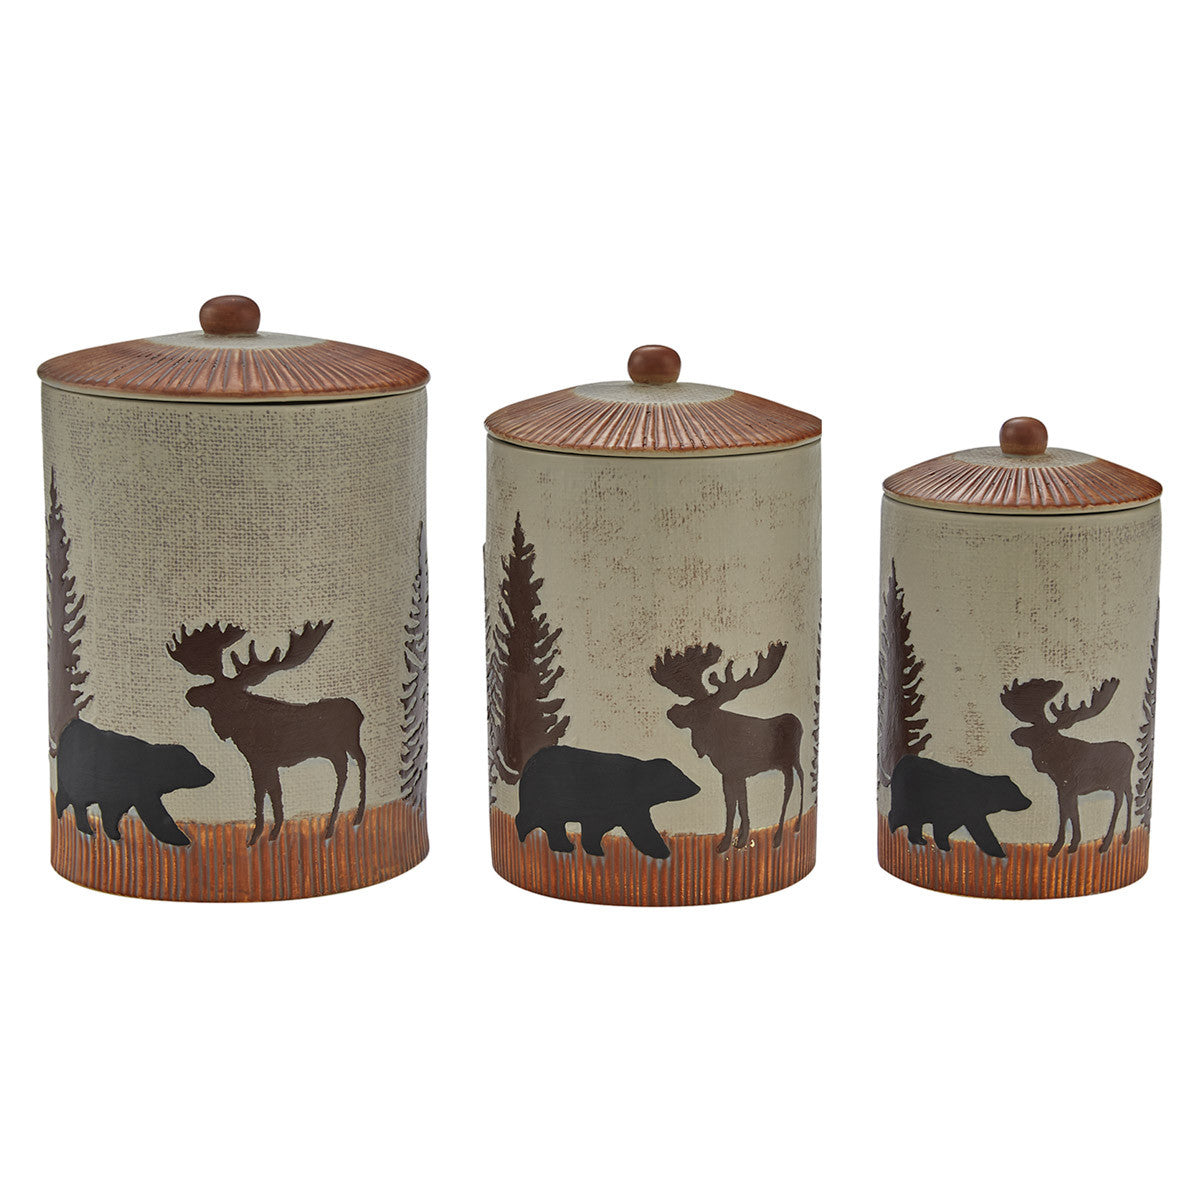 Wilderness Trail Canisters - Set of 3 Park Designs